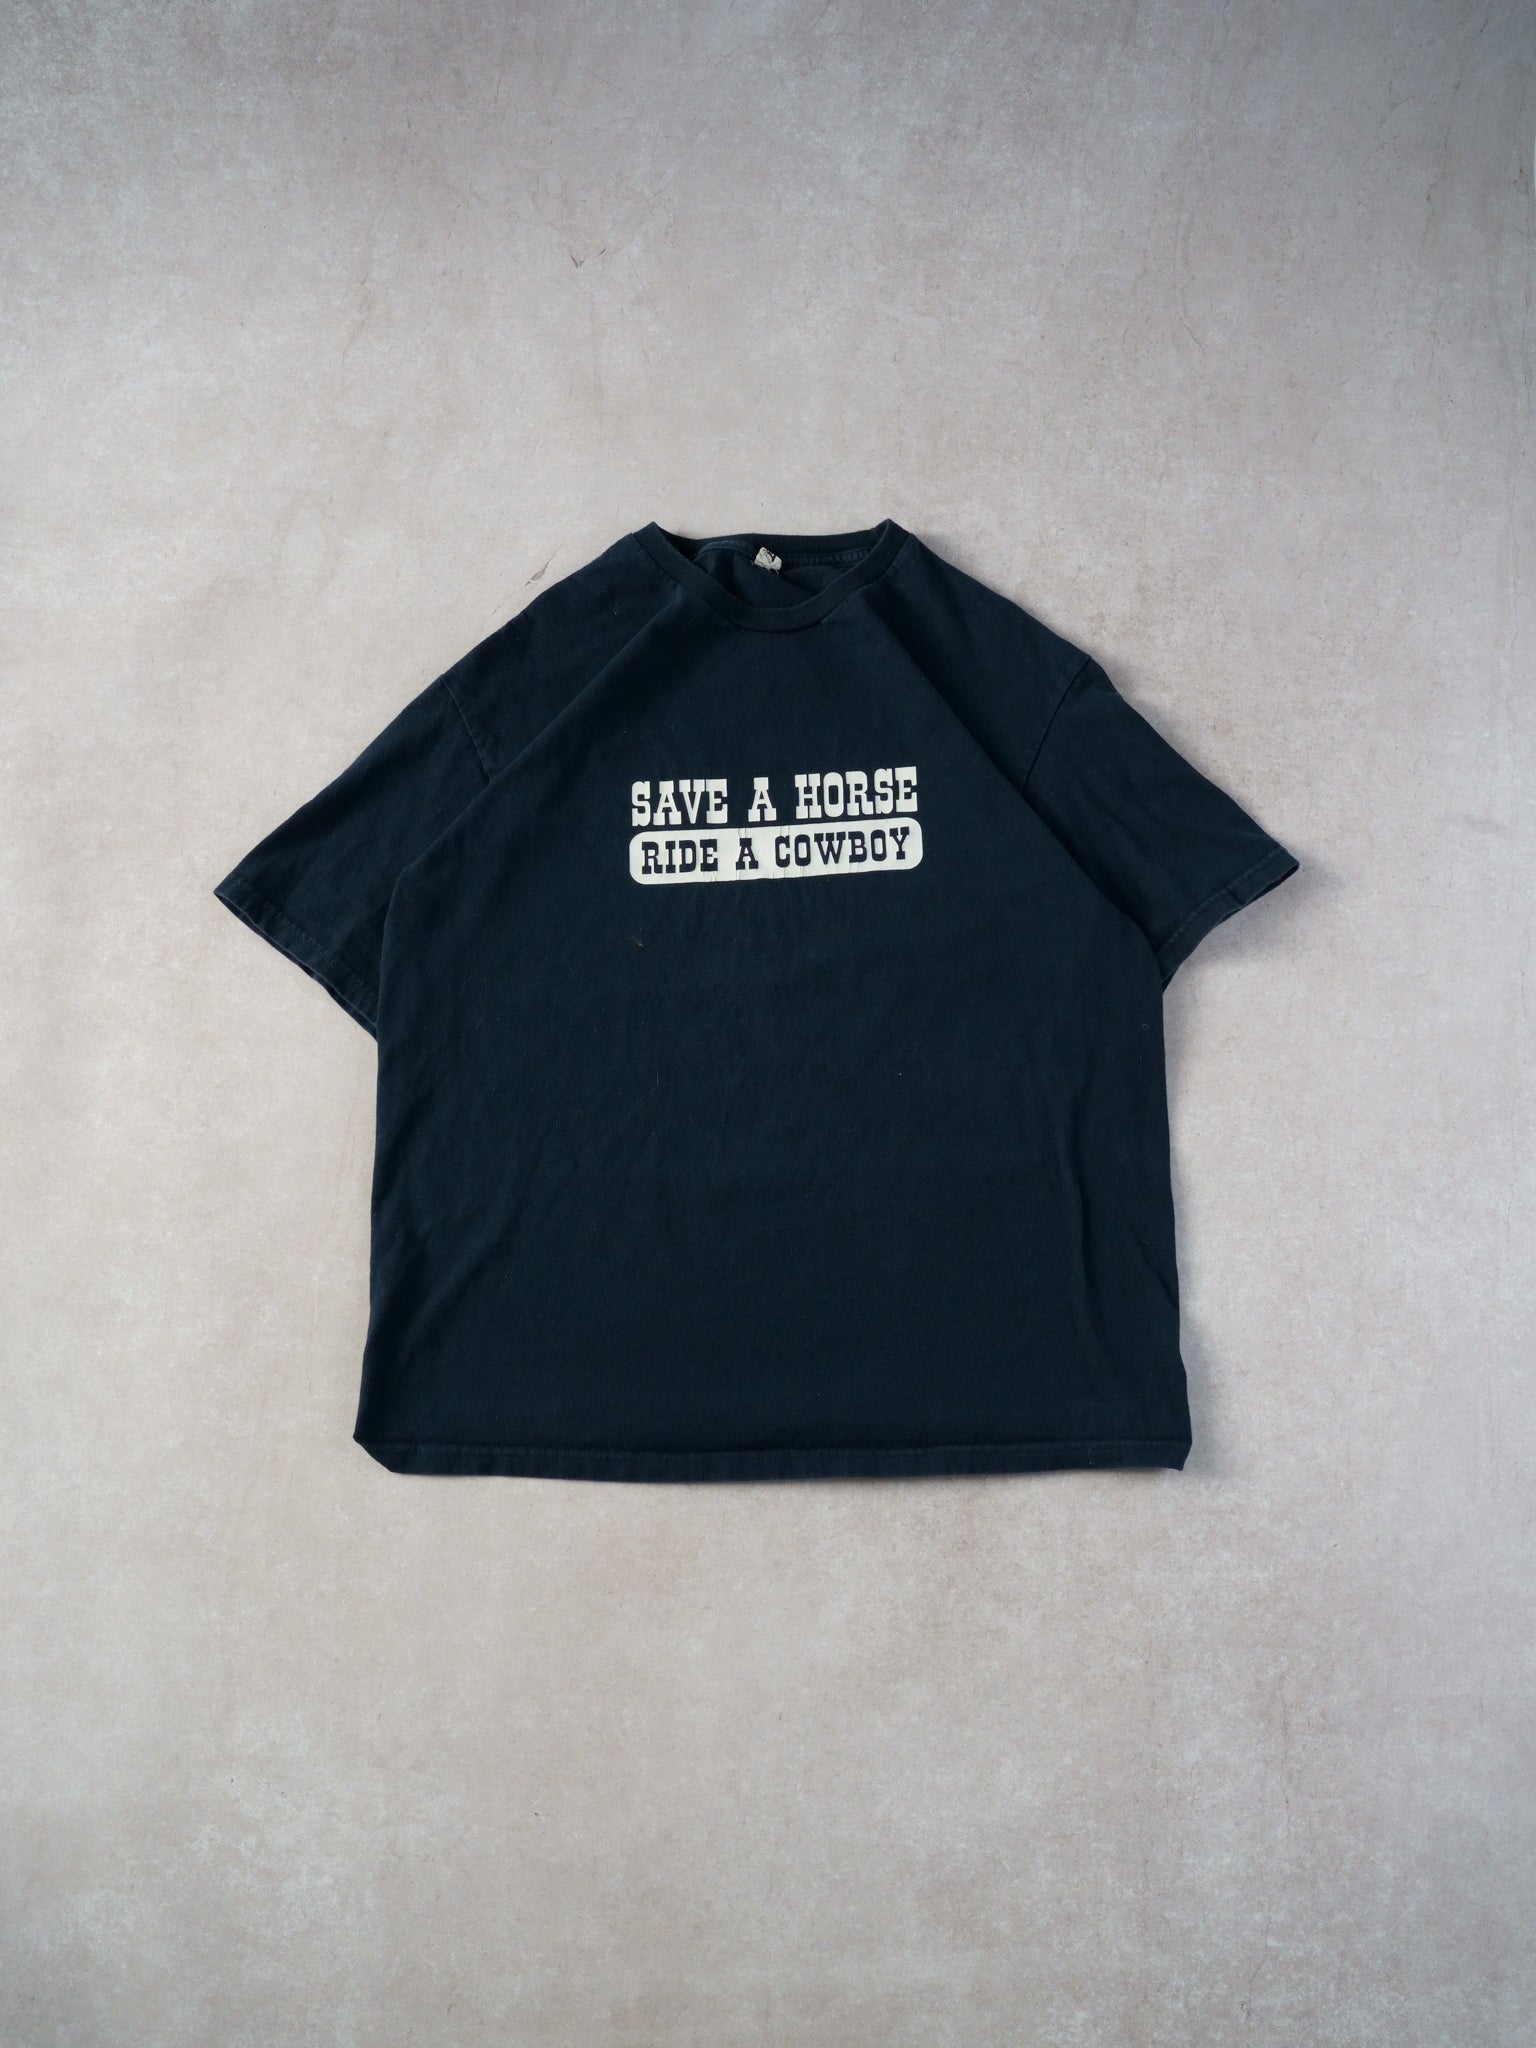 Vintage 90s Navy Blue "Save A Horse, Ride A Cowboy" Tee (M)